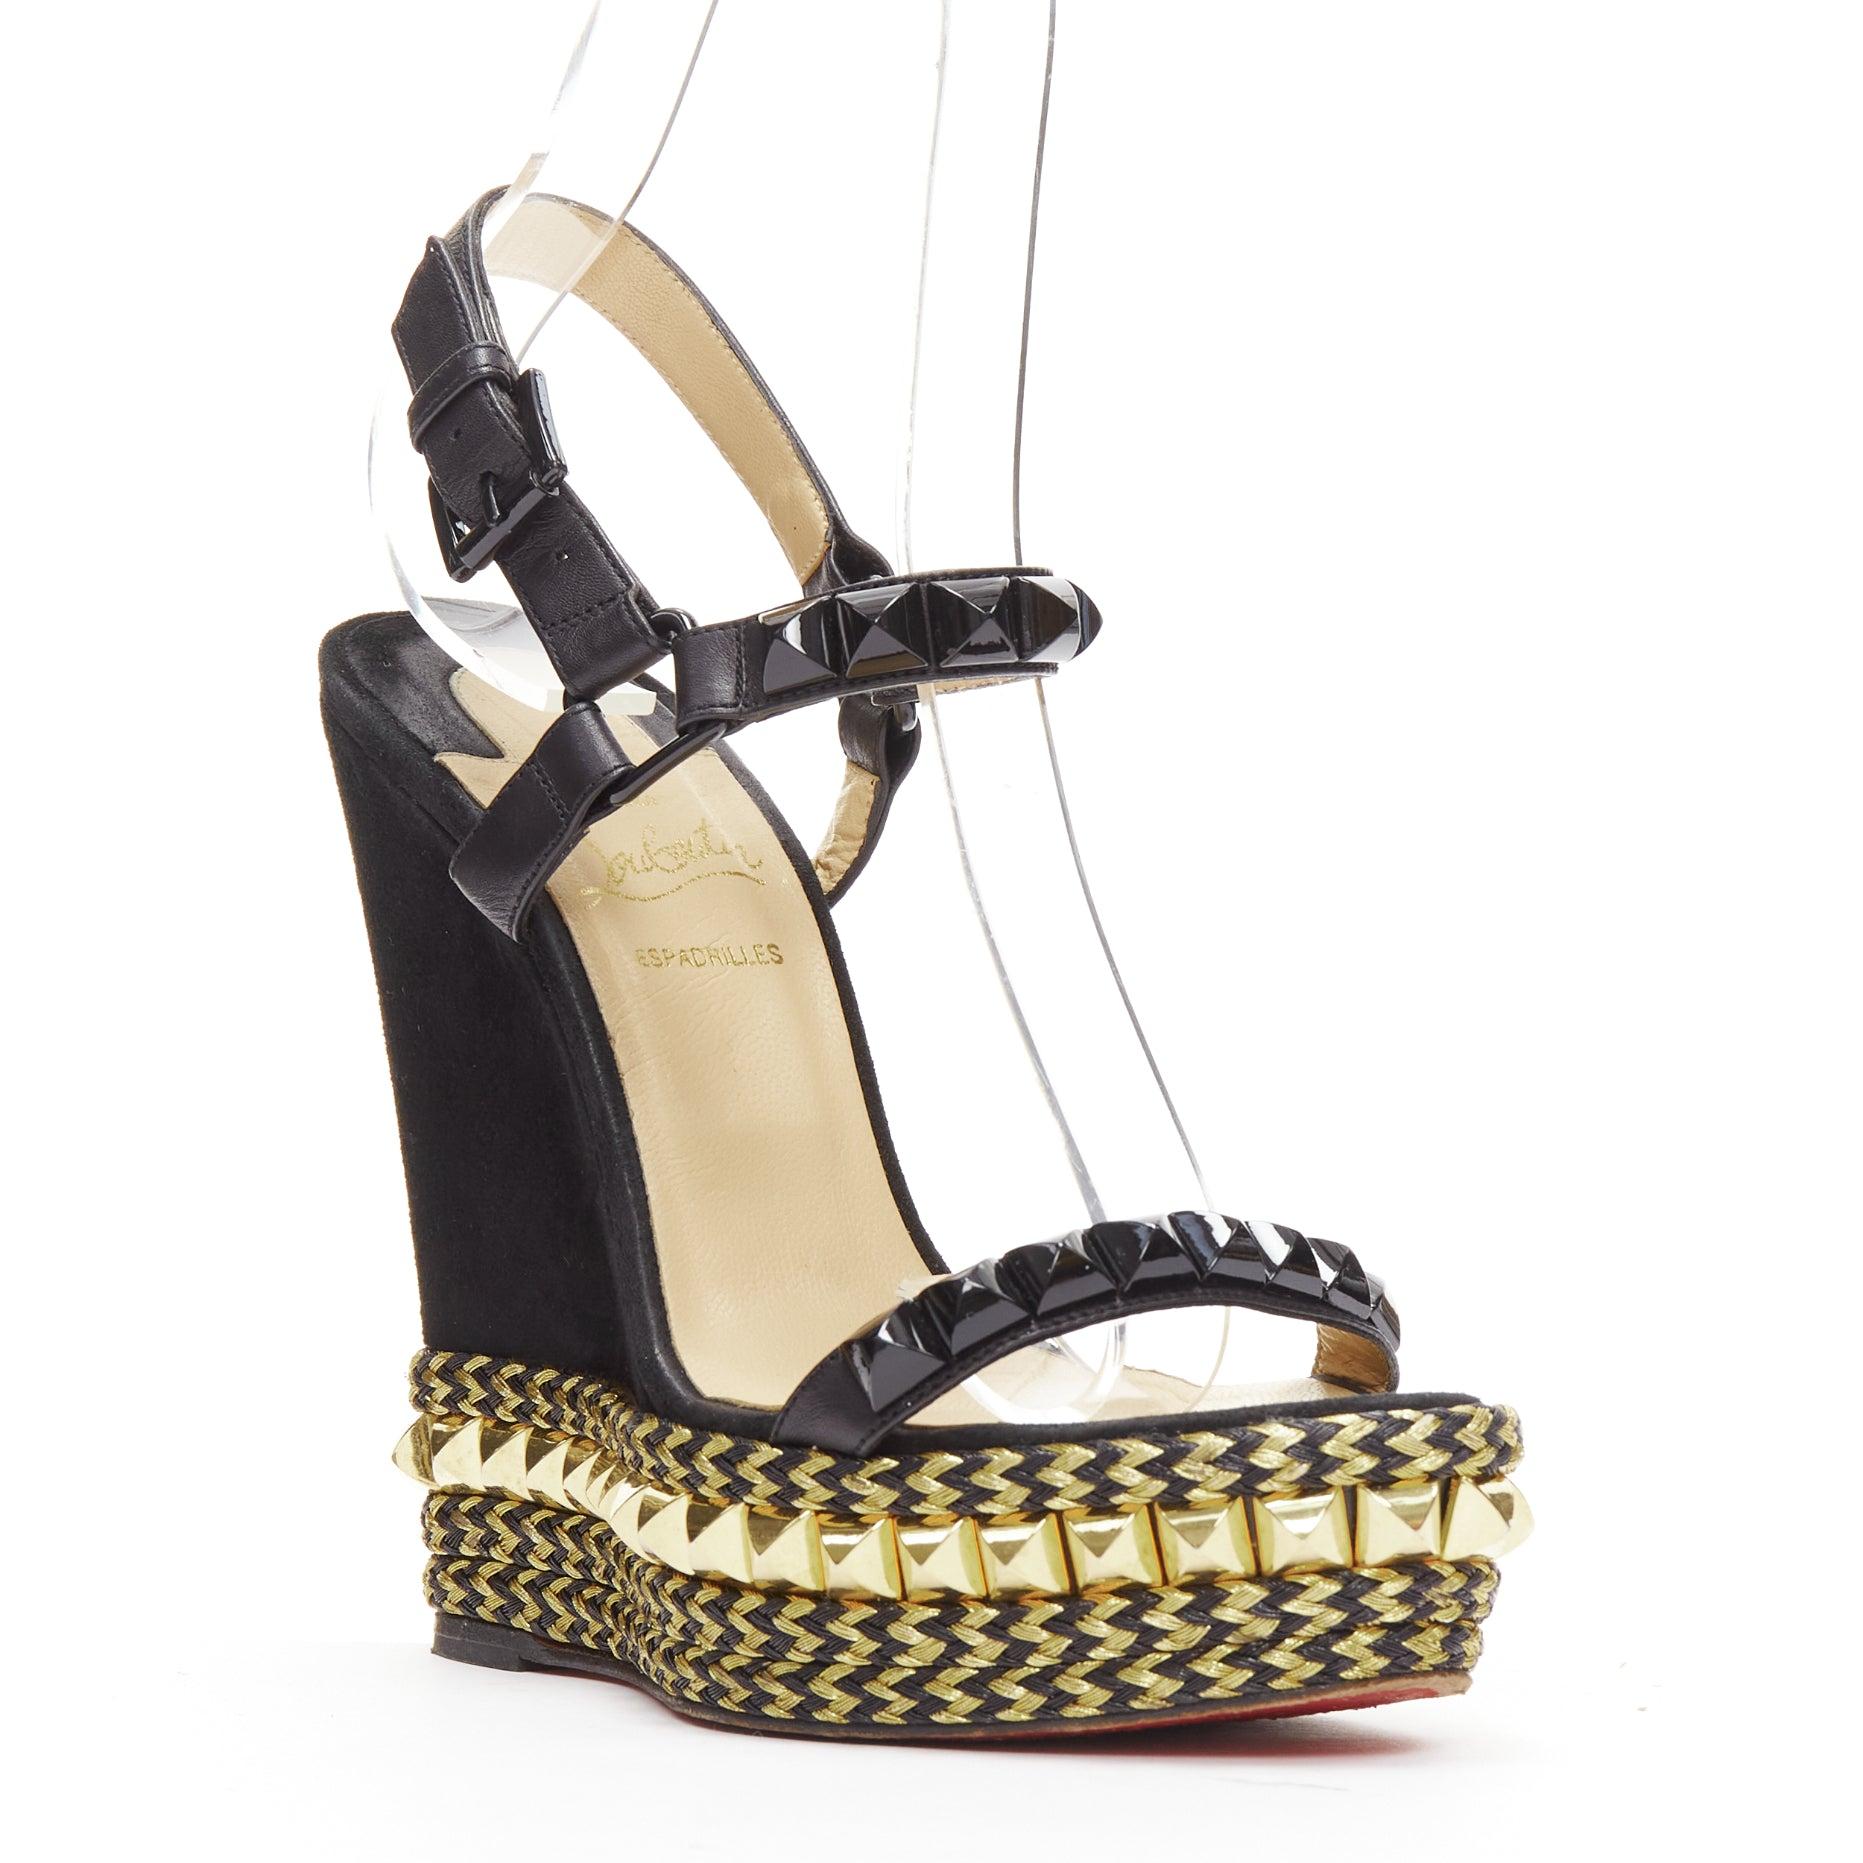 CHRISTIAN LOUBOUTIN Cataclou 140 black suede gold spike stud platform wedge EU36
Reference: TGAS/D00958
Brand: Christian Louboutin
Model: Catacloud 140
Material: Suede, Leather
Color: Black, Gold
Pattern: Solid
Closure: Ankle Strap
Lining: Brown